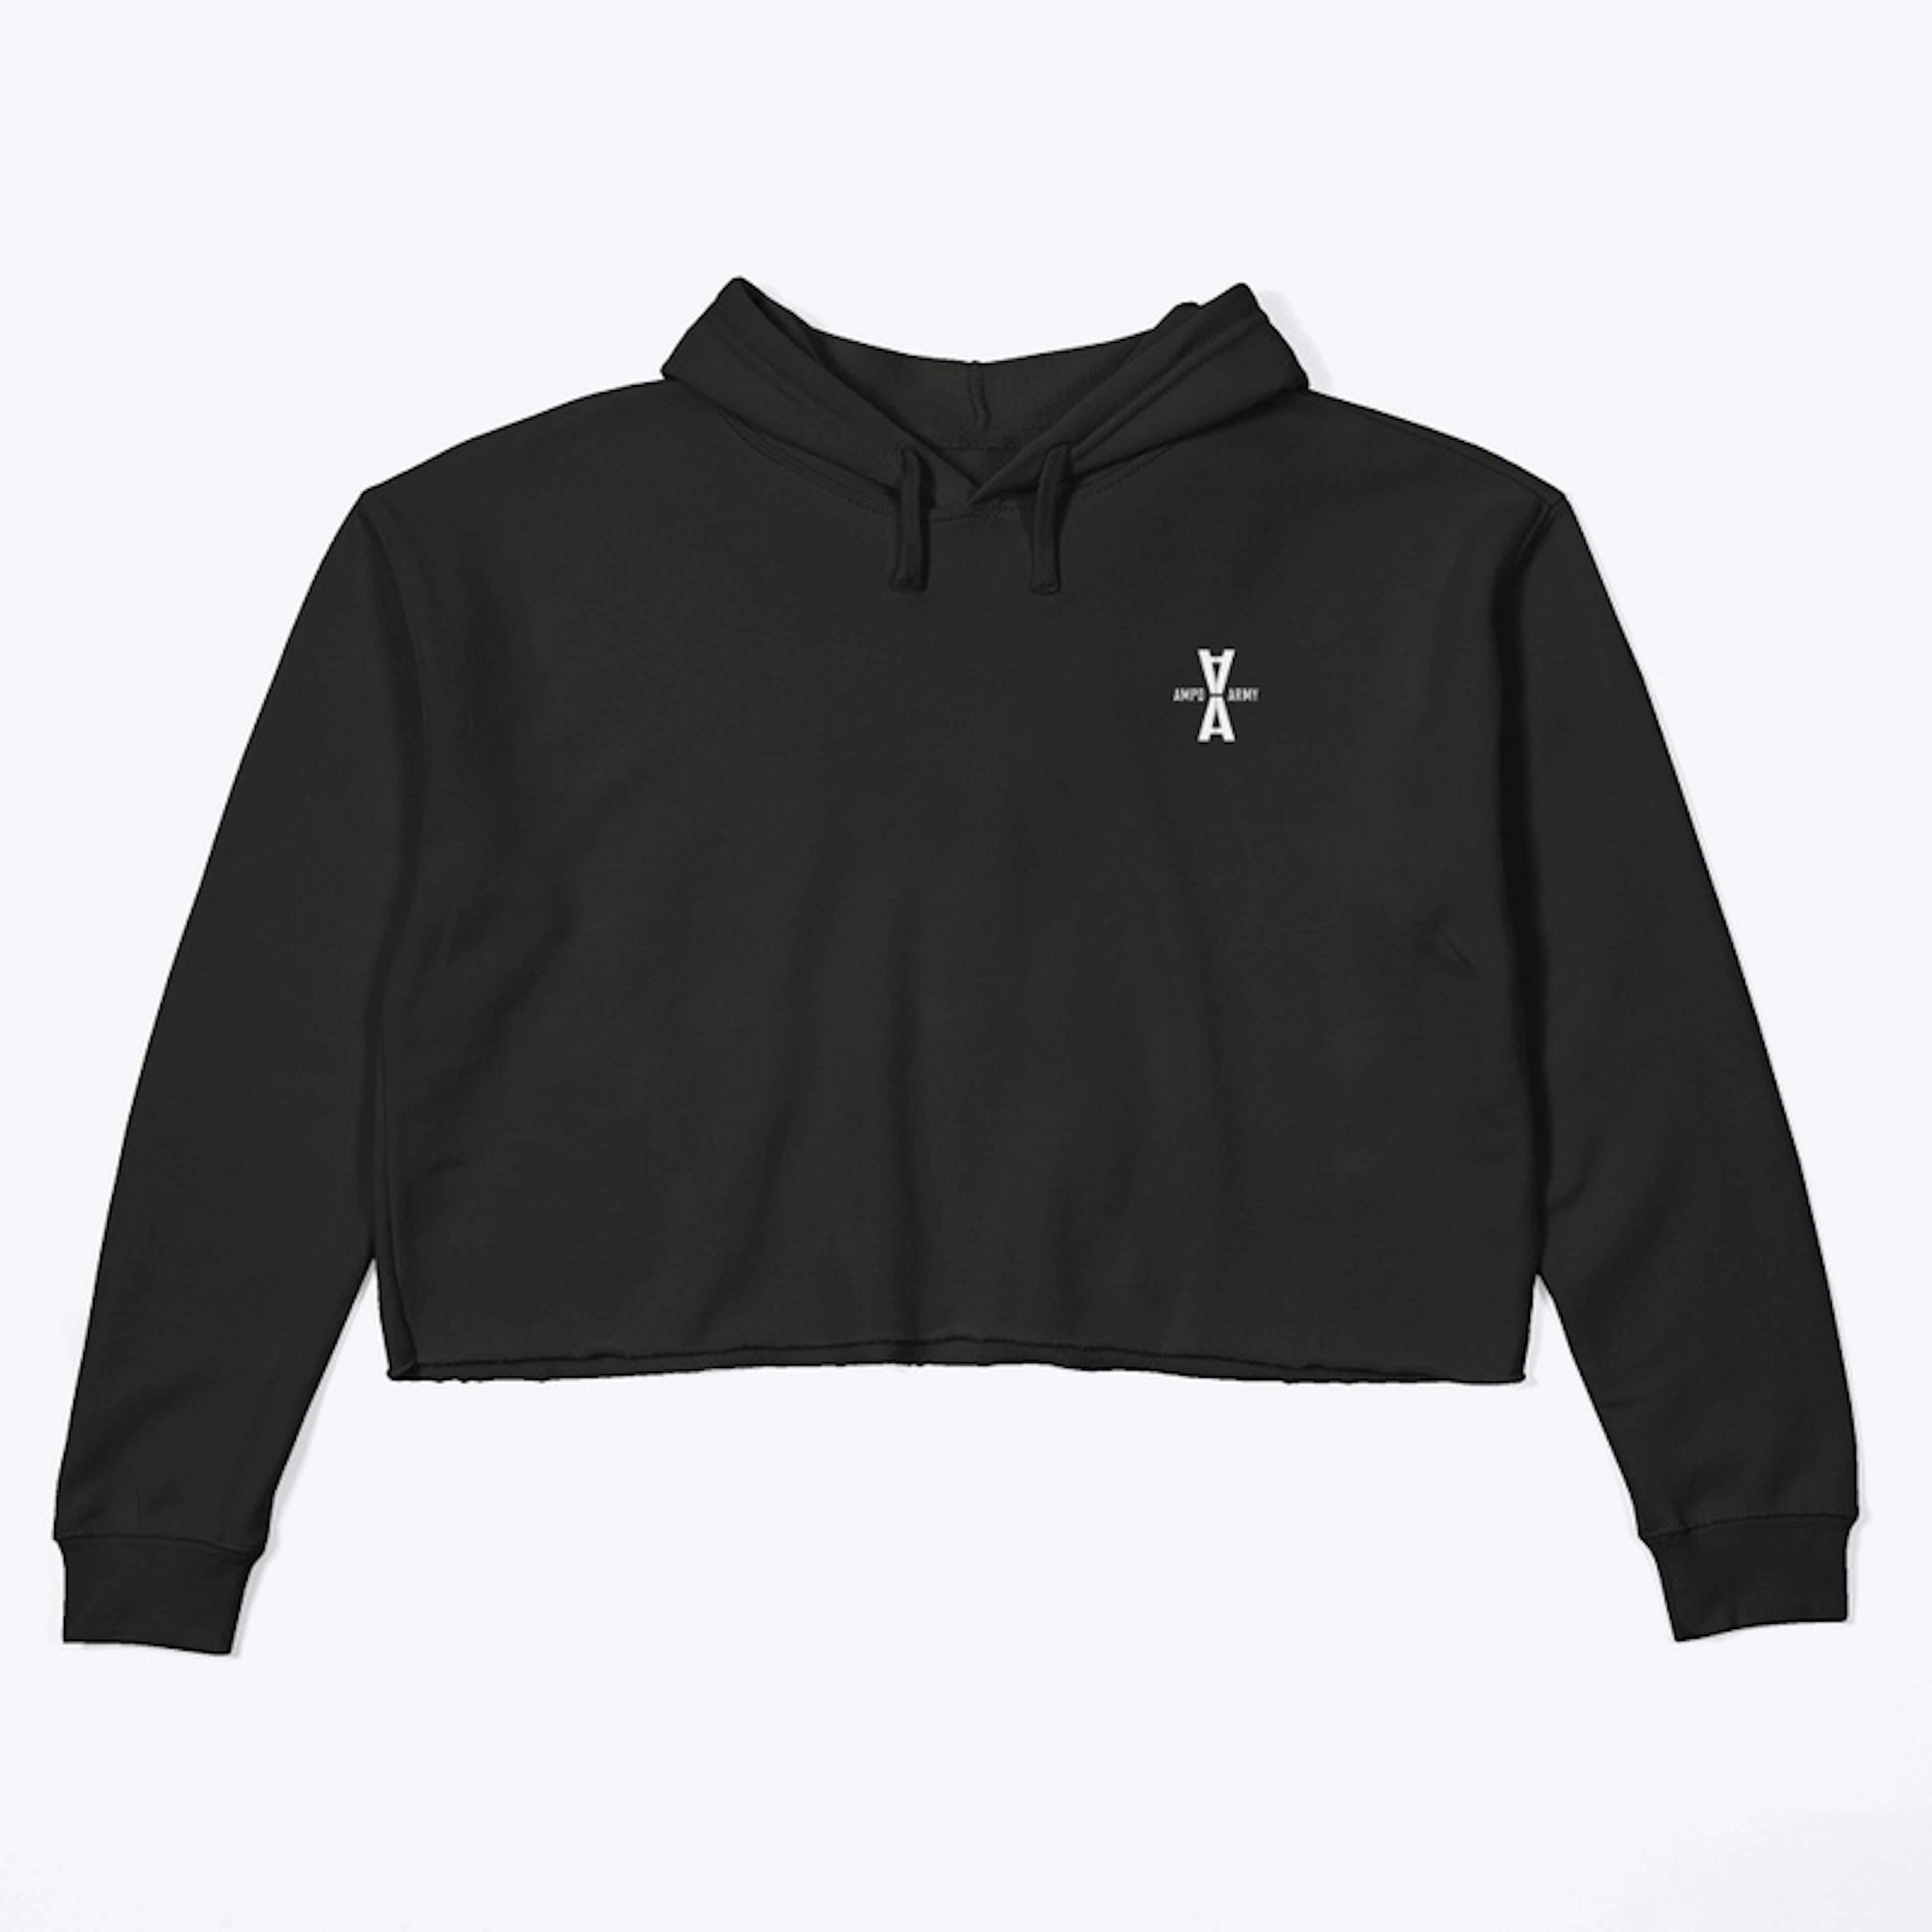 AMPD ARMY PREVAIL CROPPED HOODIE